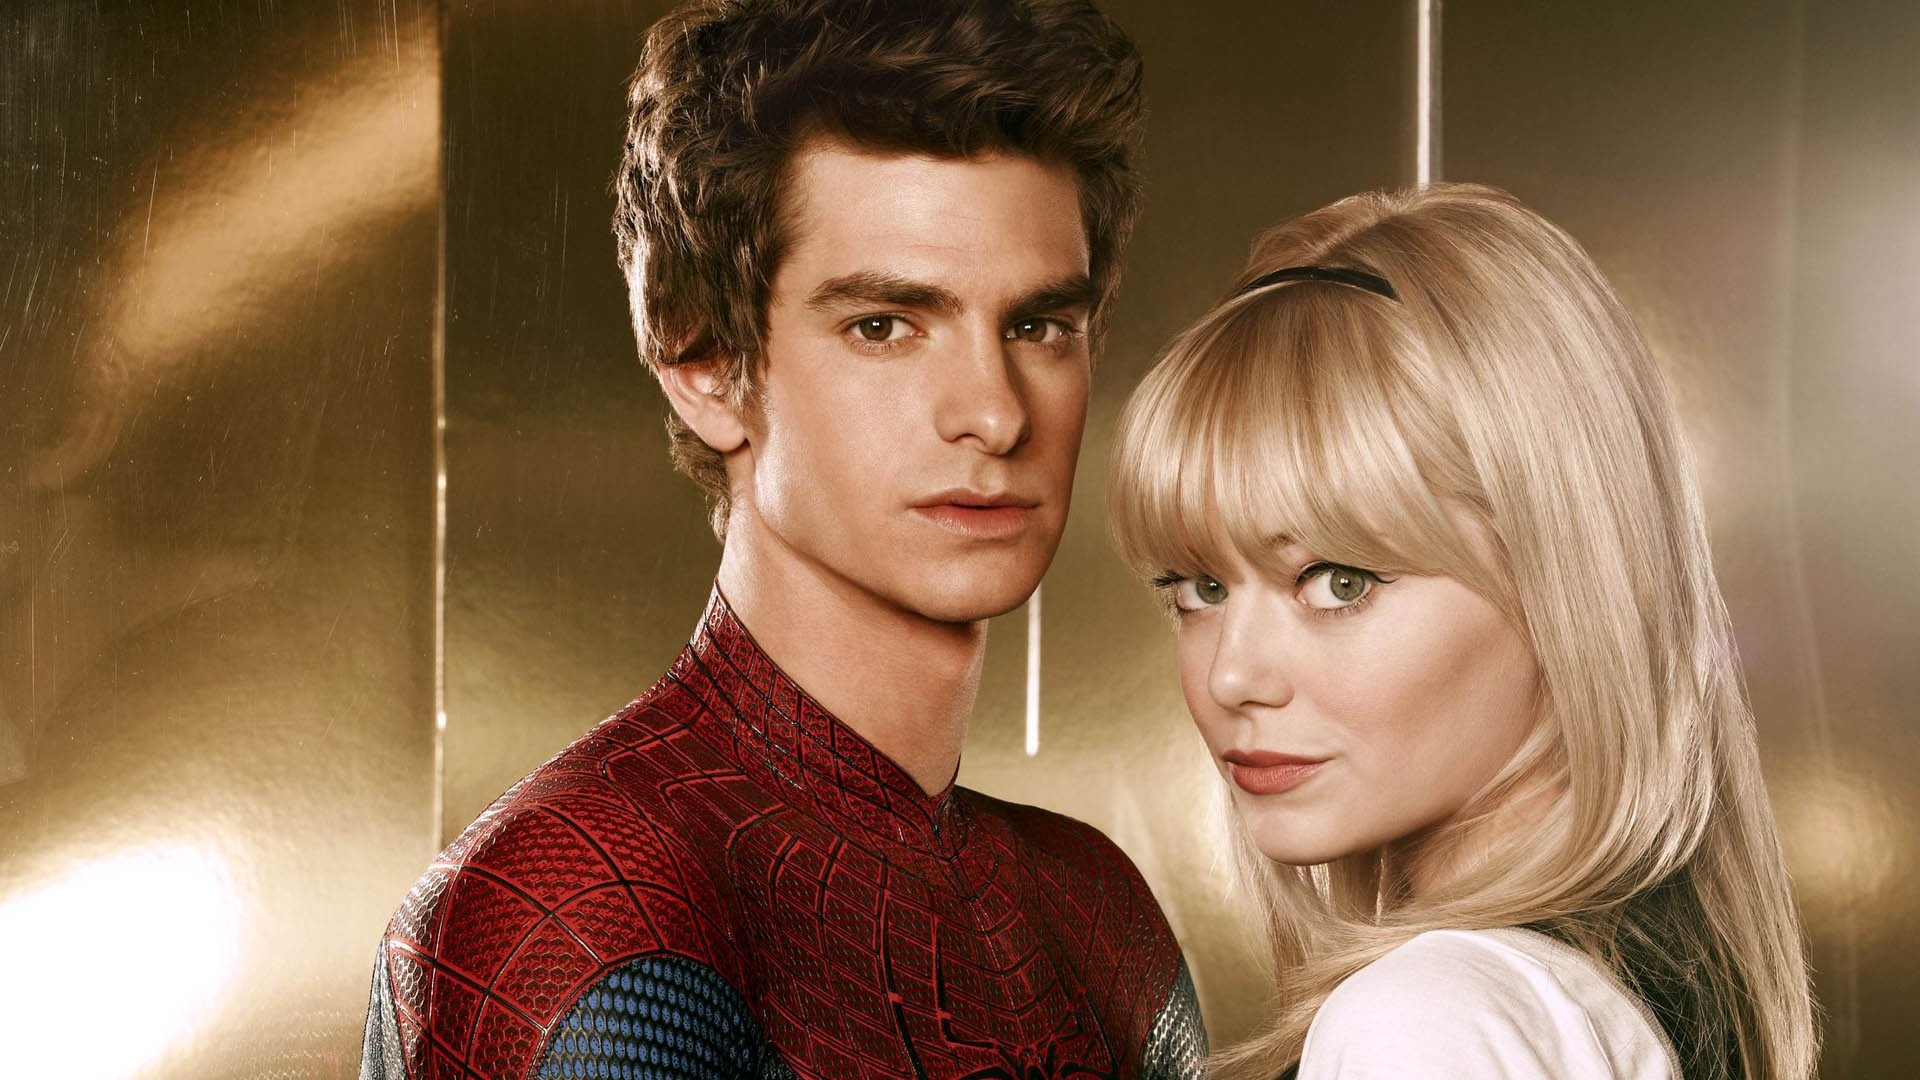 Gwen Stacy, Spider-Man movies, 1920x1080, Background images, 1920x1080 Full HD Desktop